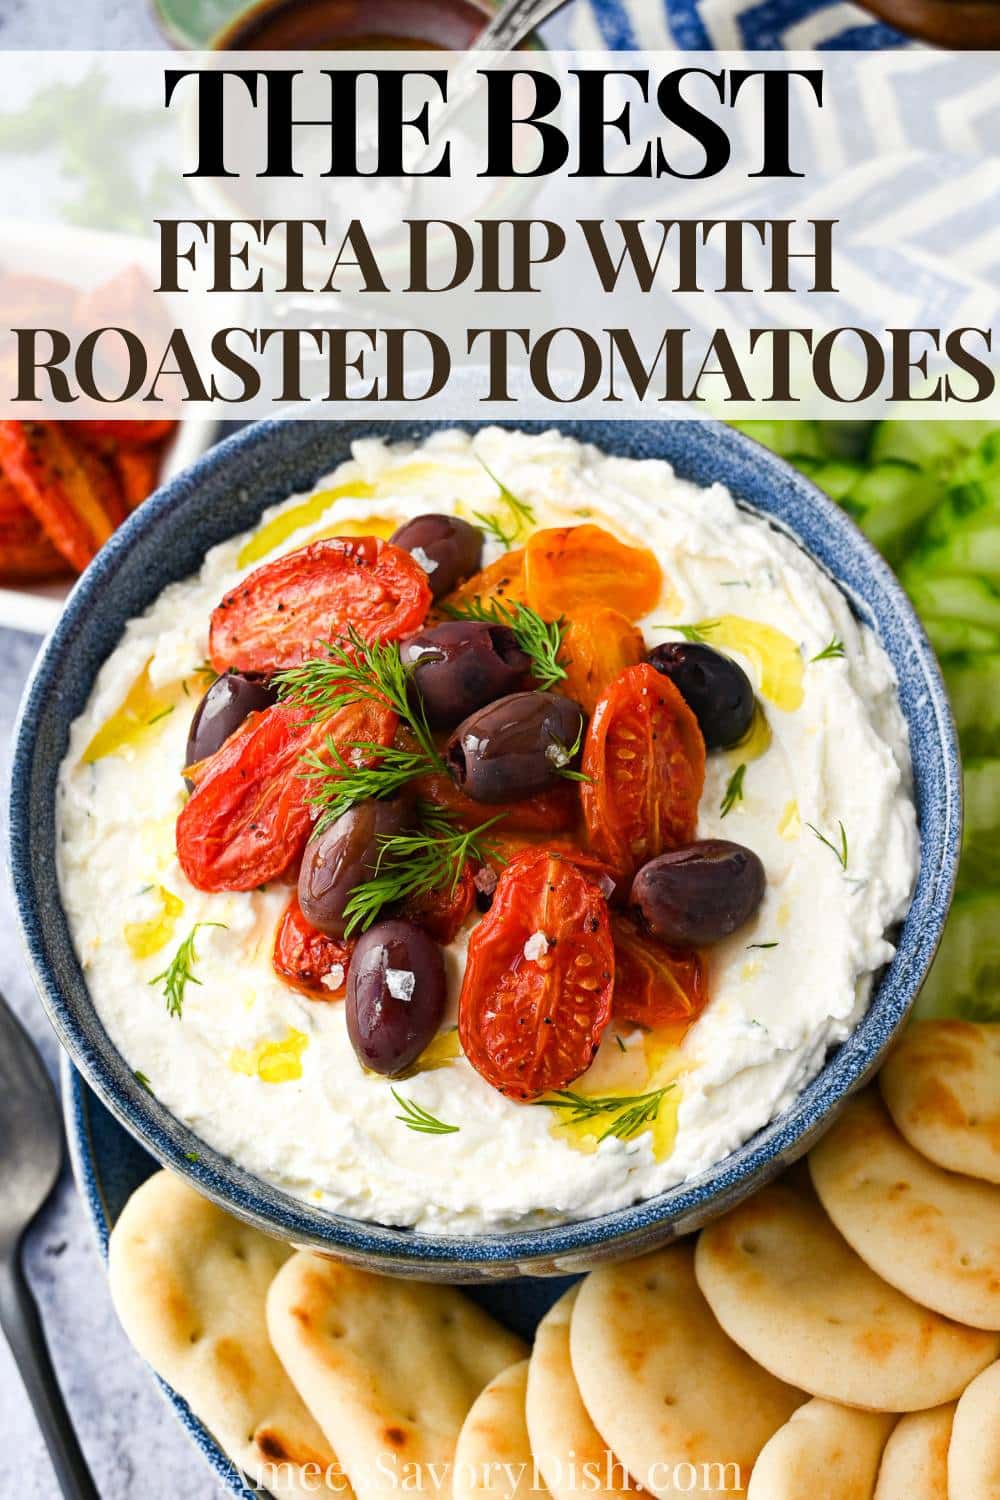  Topped with roasted cherry tomatoes and kalamata olives, this whipped feta dip is pure perfection -perfect as an appetizer or sandwich spread! via @Ameessavorydish